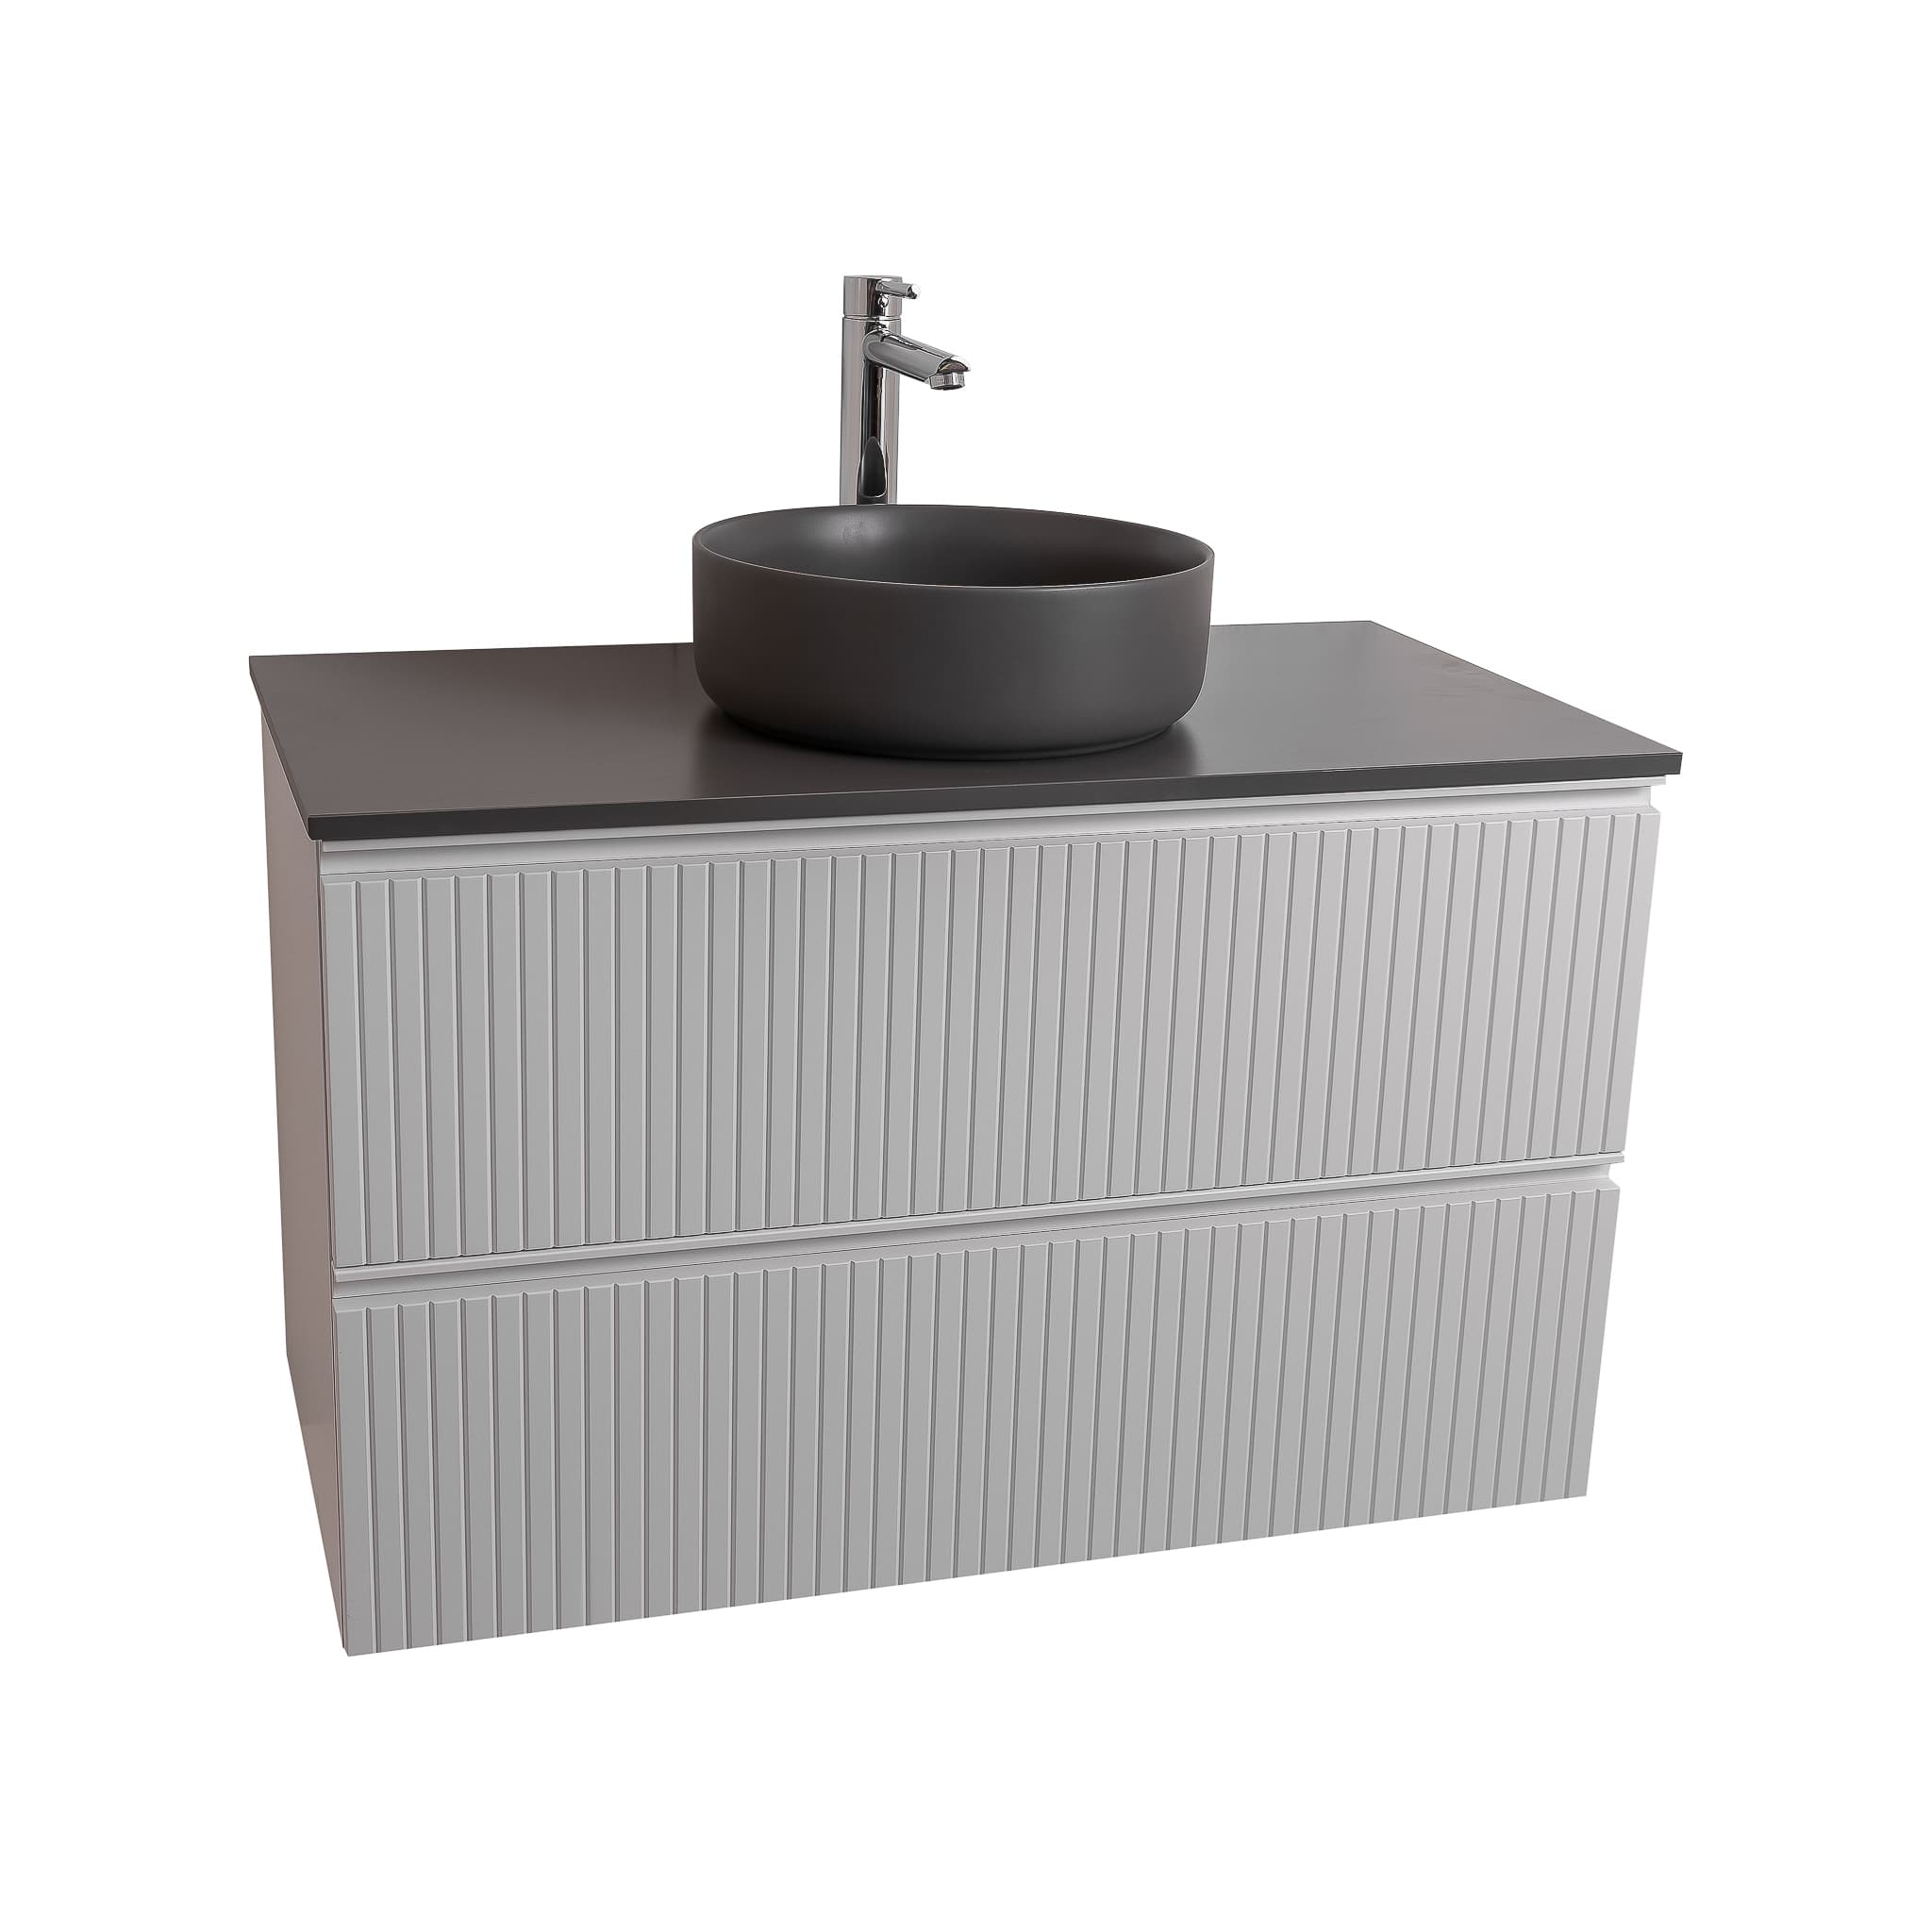 Ares 35.5 Matte White Cabinet, Ares Grey Ceniza Top And Ares Grey Ceniza Ceramic Basin, Wall Mounted Modern Vanity Set